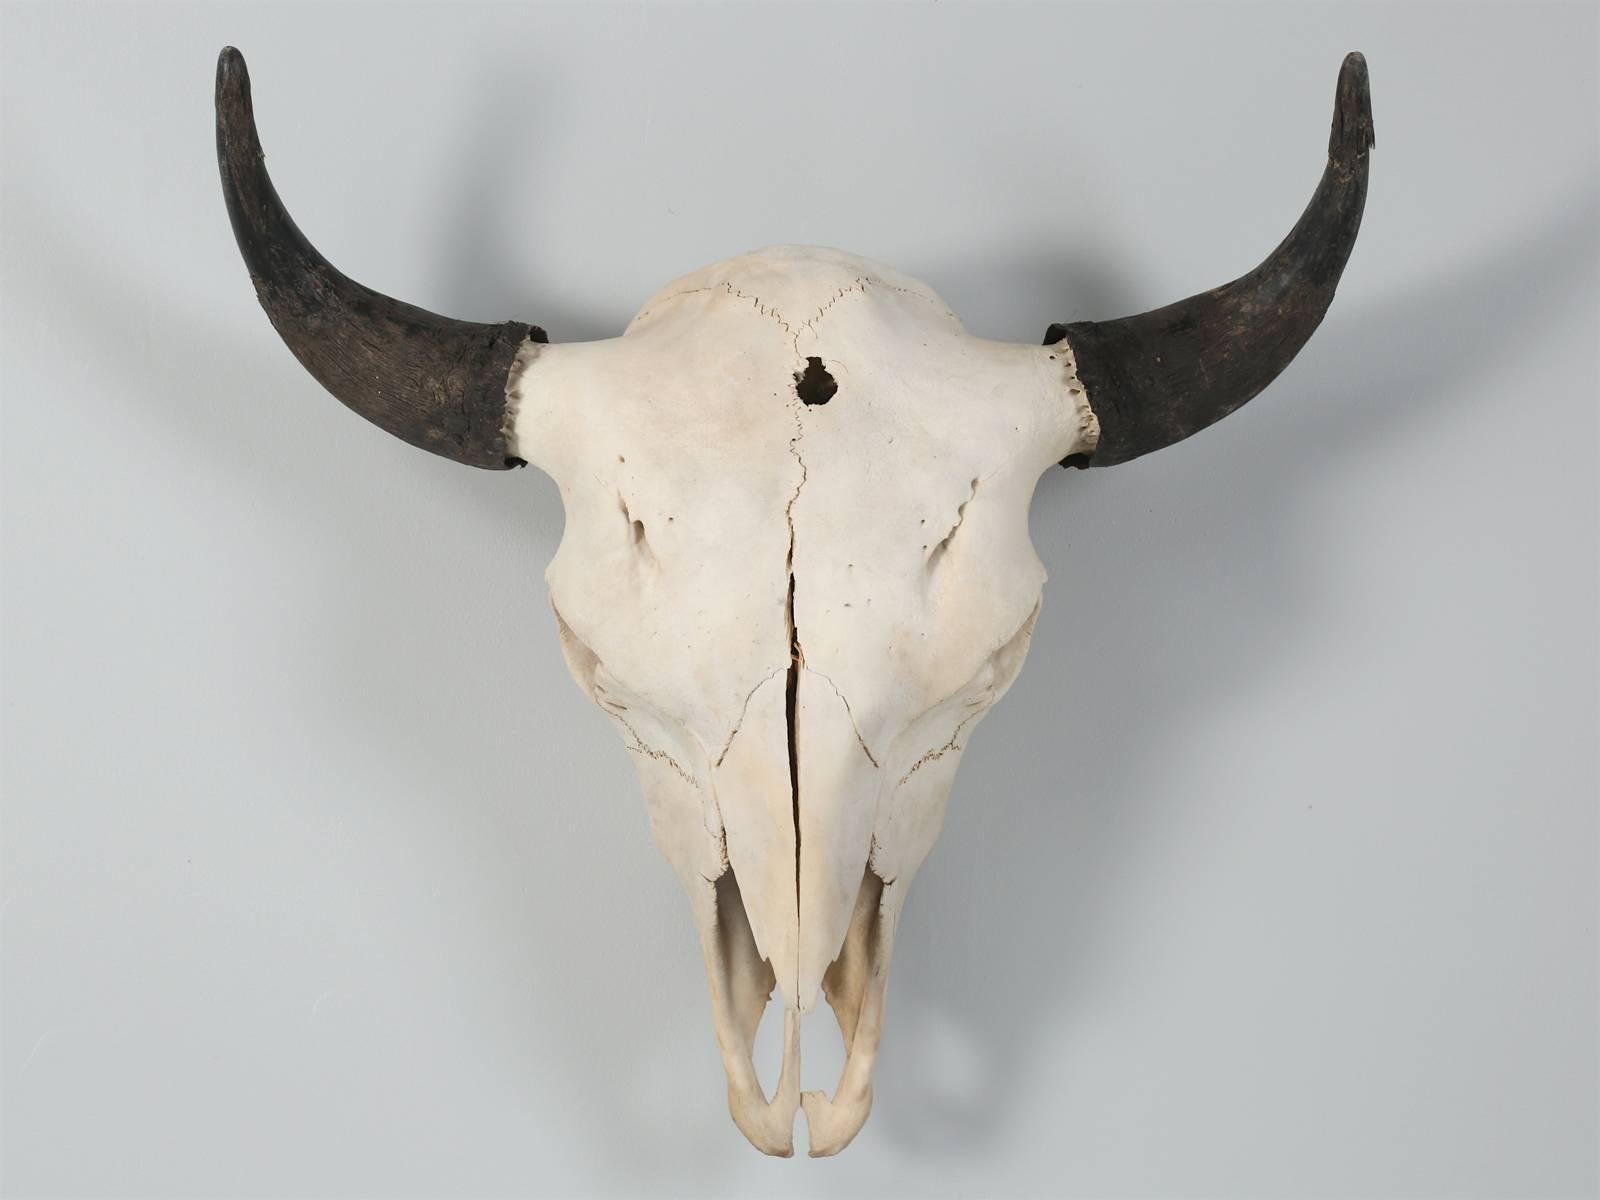 Most folk just call these Buffalo skulls, but they are actually Bison, that once roamed our western plains and Northern Europe, whereas, Buffalo are actually Asian.